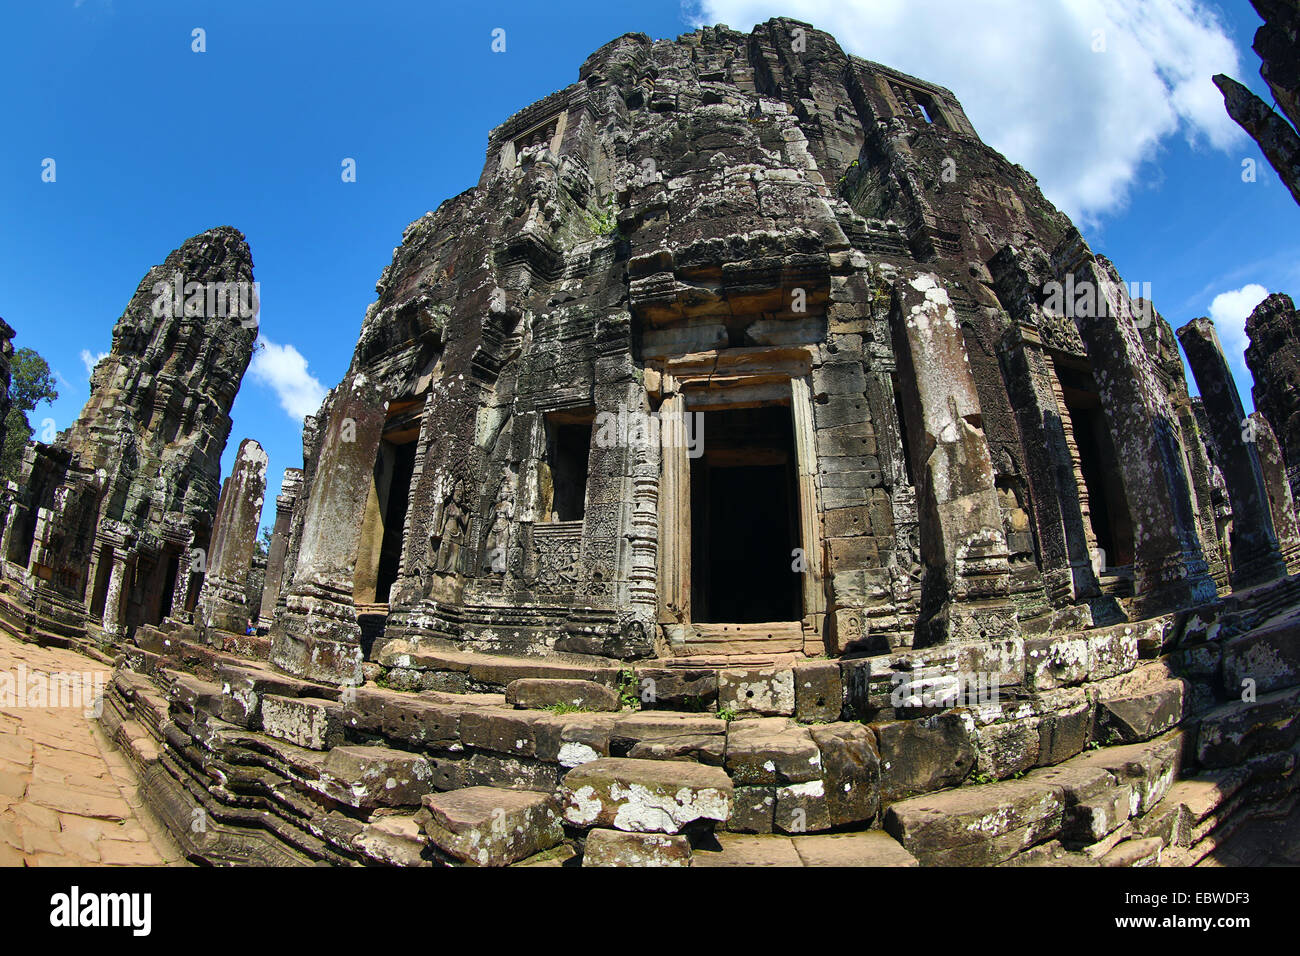 Bayon, Khmer Temple in Angkor Thom, Siem Reap, Cambodia. Built in the late 12th / early 13th century as the official state templ Stock Photo